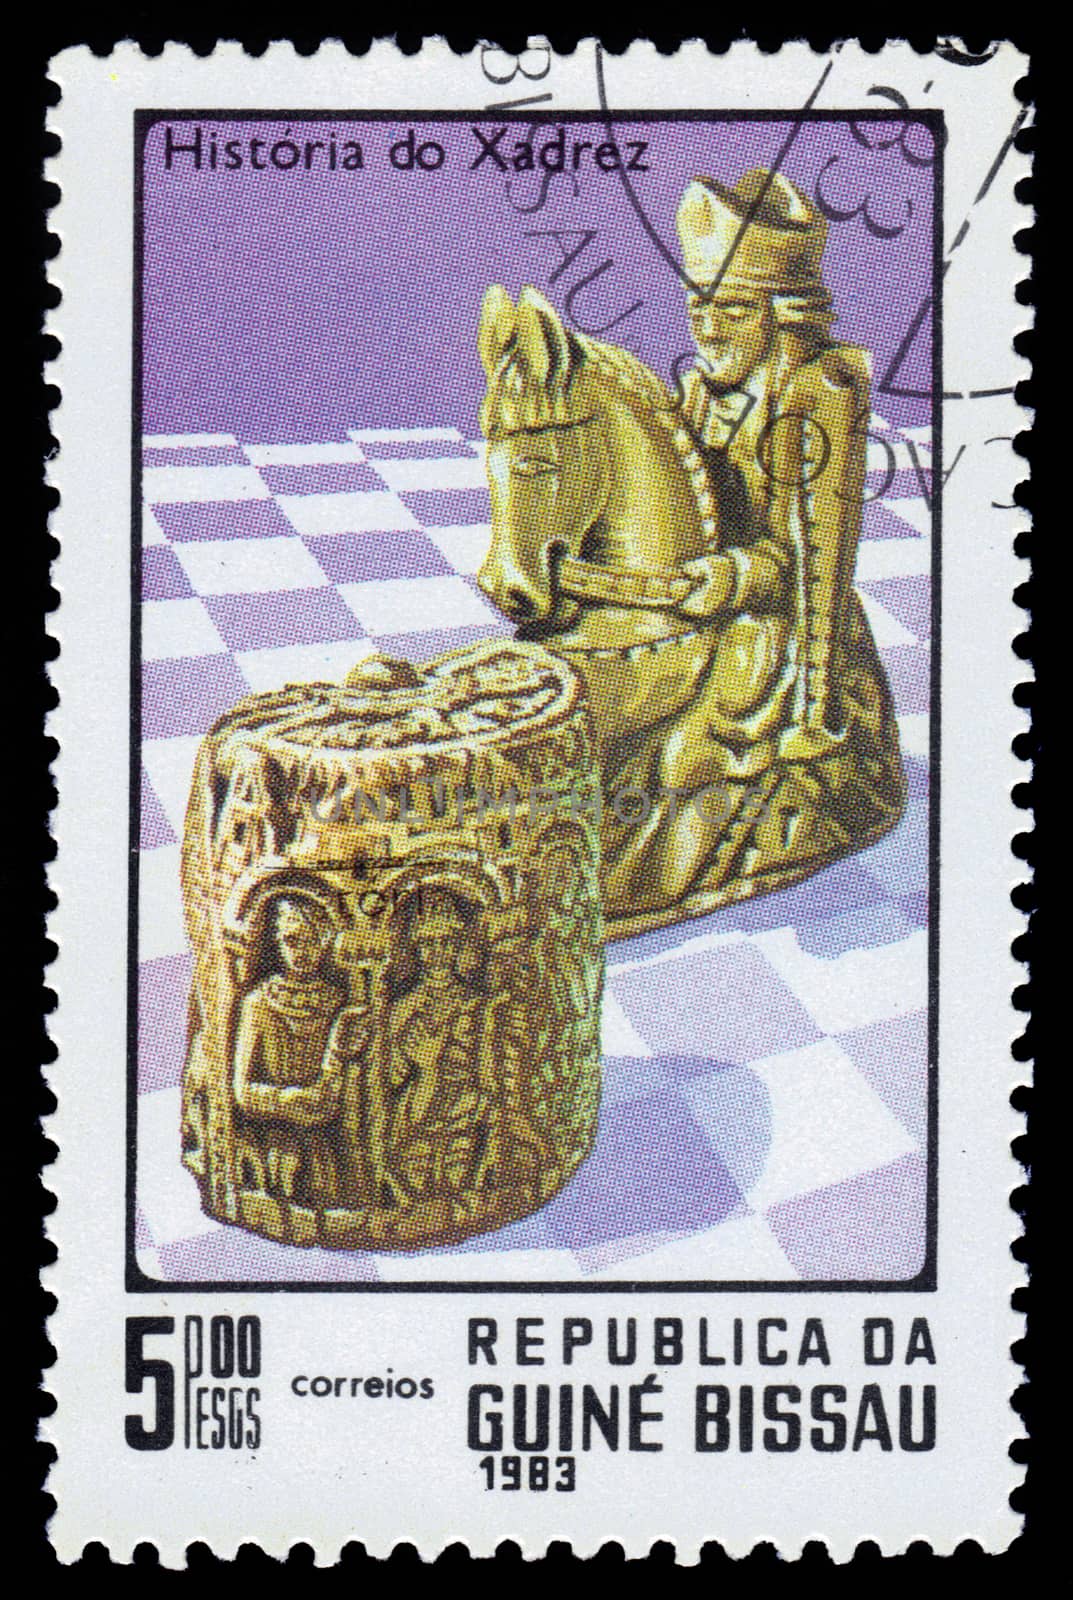 Guinea-Bissau, Republic - CIRCA 1983: A stamp printed by Guinea-Bissau, shows the chess pieces, series History of Chess, circa 1983